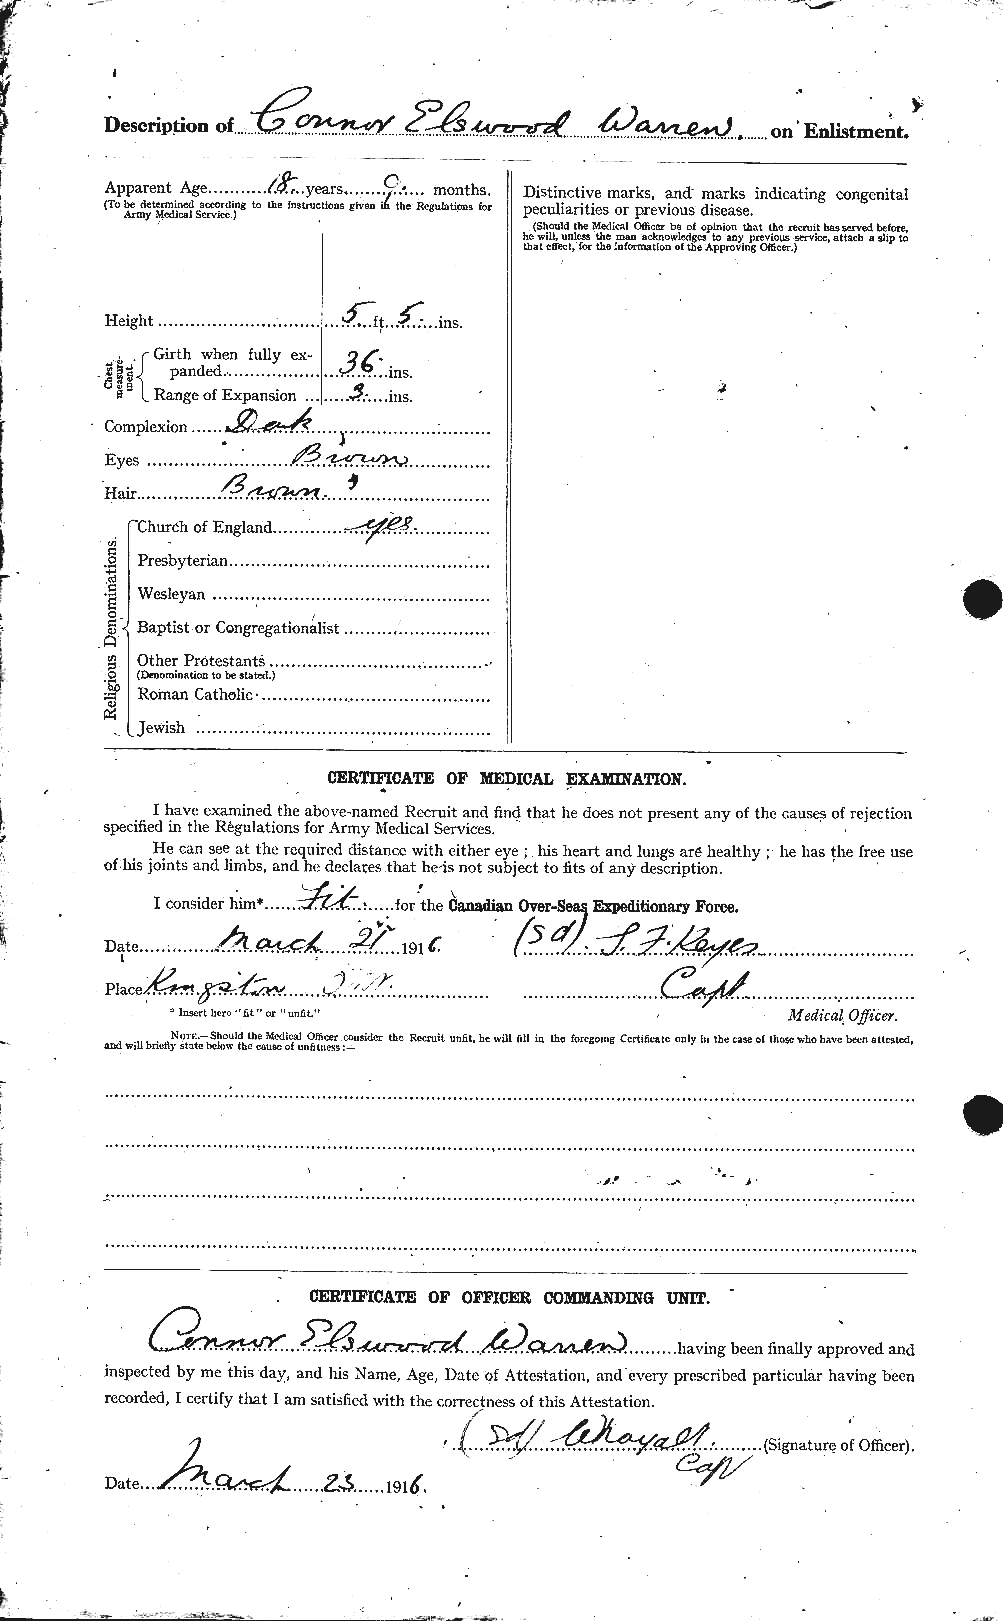 Personnel Records of the First World War - CEF 658399b